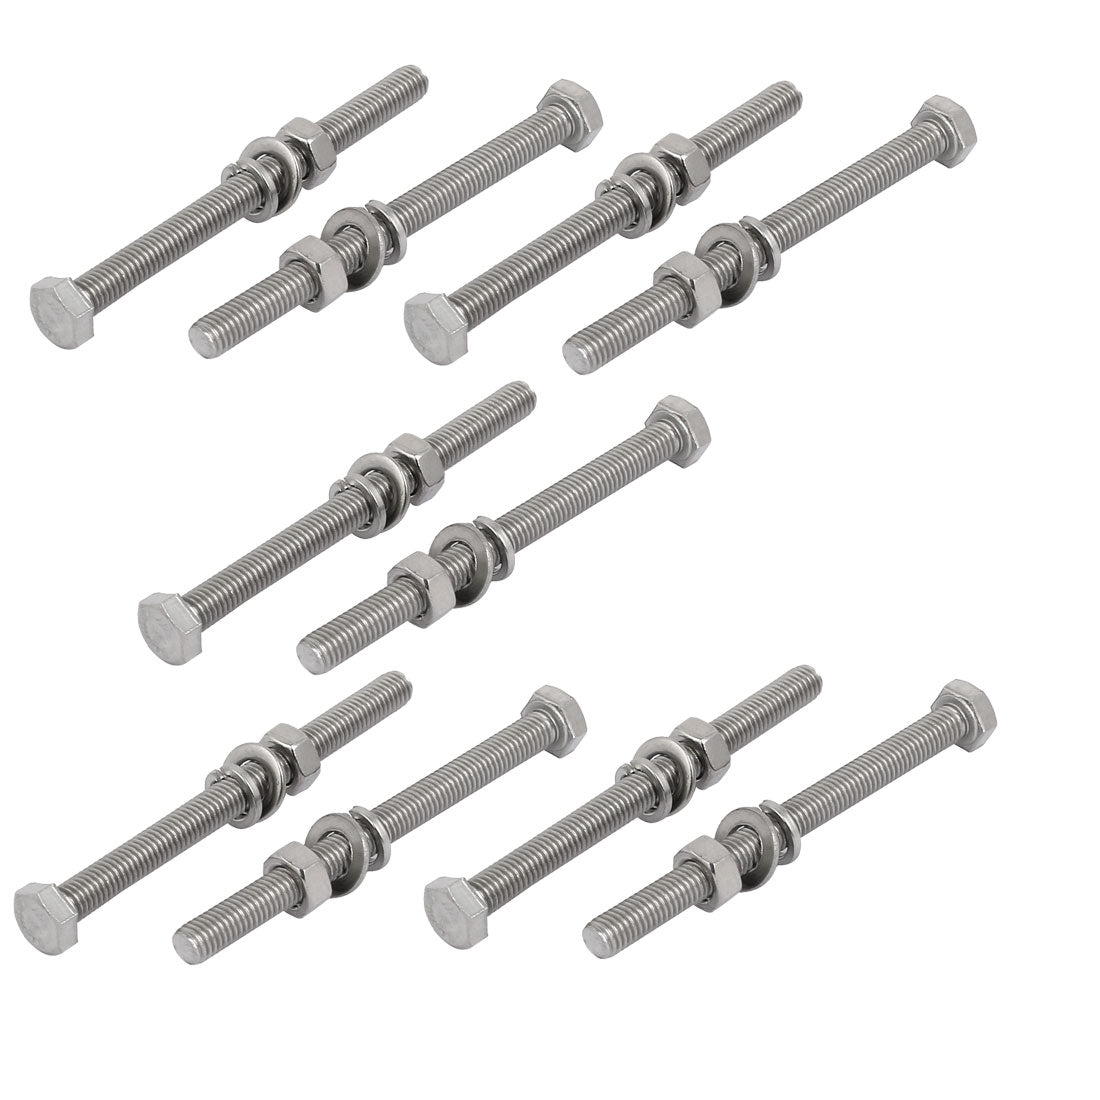 uxcell Uxcell 10pcs 304 Stainless Steel M5x60mm Hex Bolts w Nuts and Washers Assortment Kit